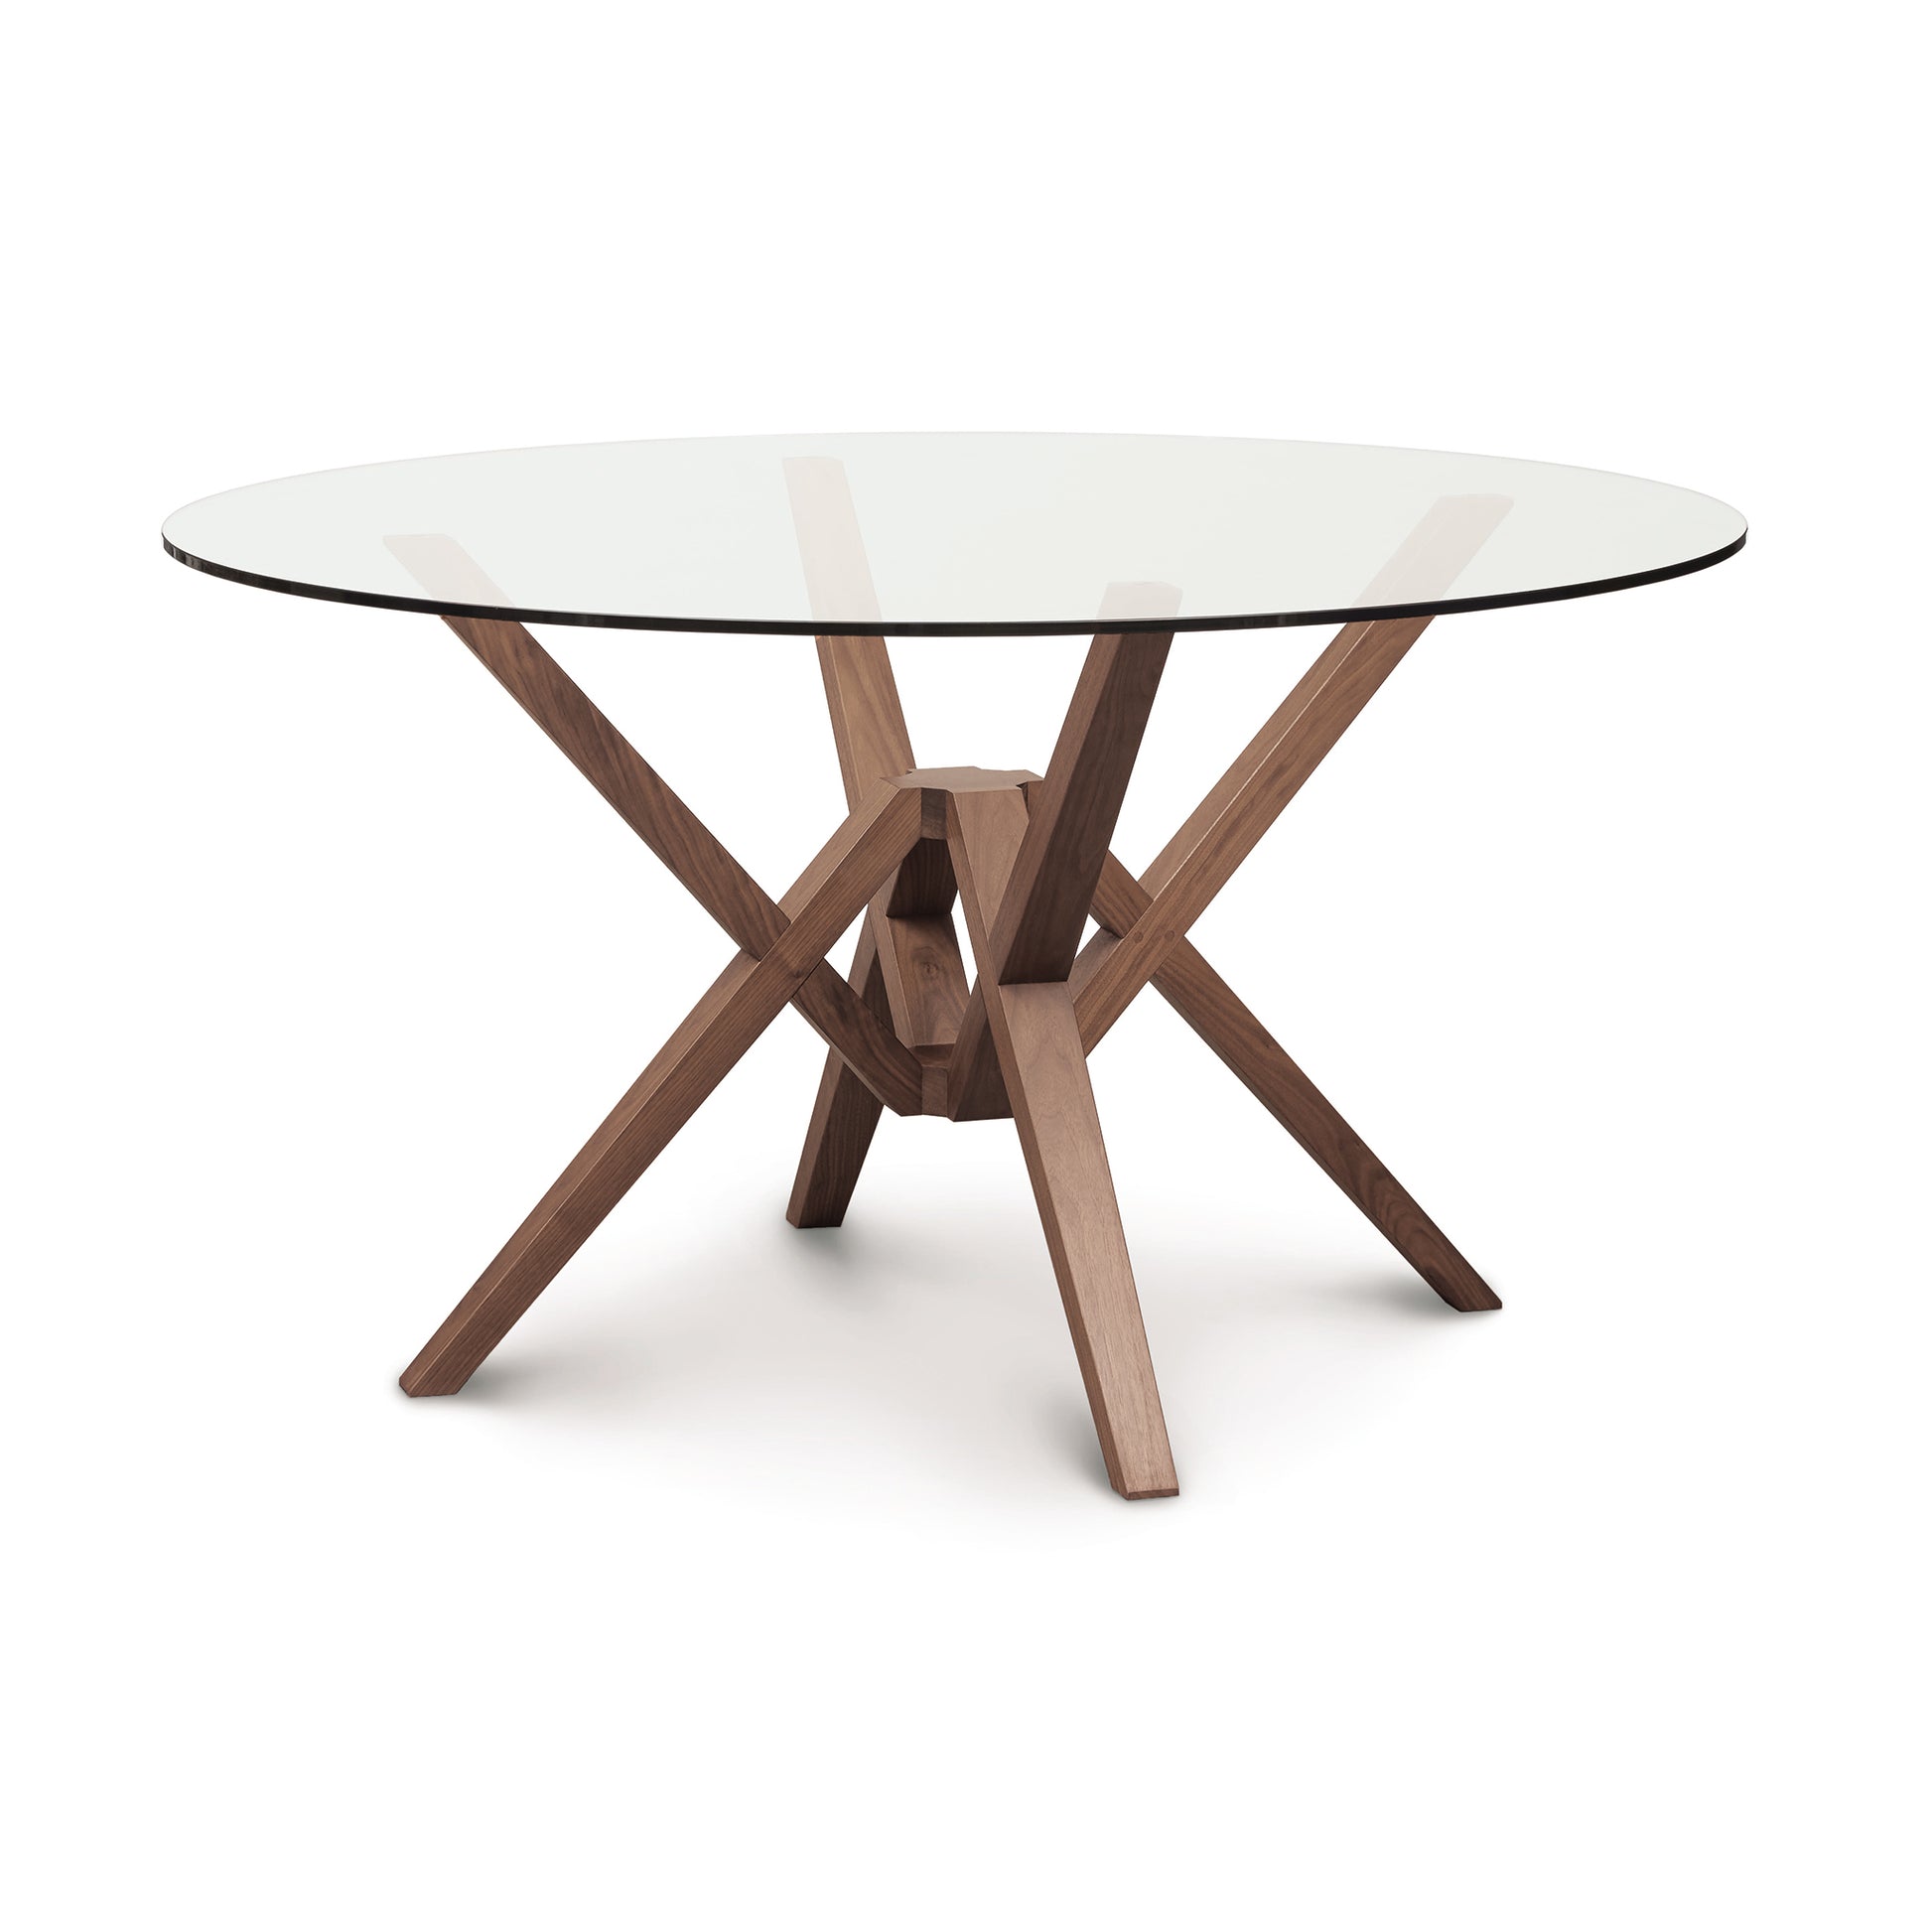 The Copeland Furniture Exeter Round Glass Top Table is a modern dining table with innovative engineering, featuring a sleek glass top and wooden legs.